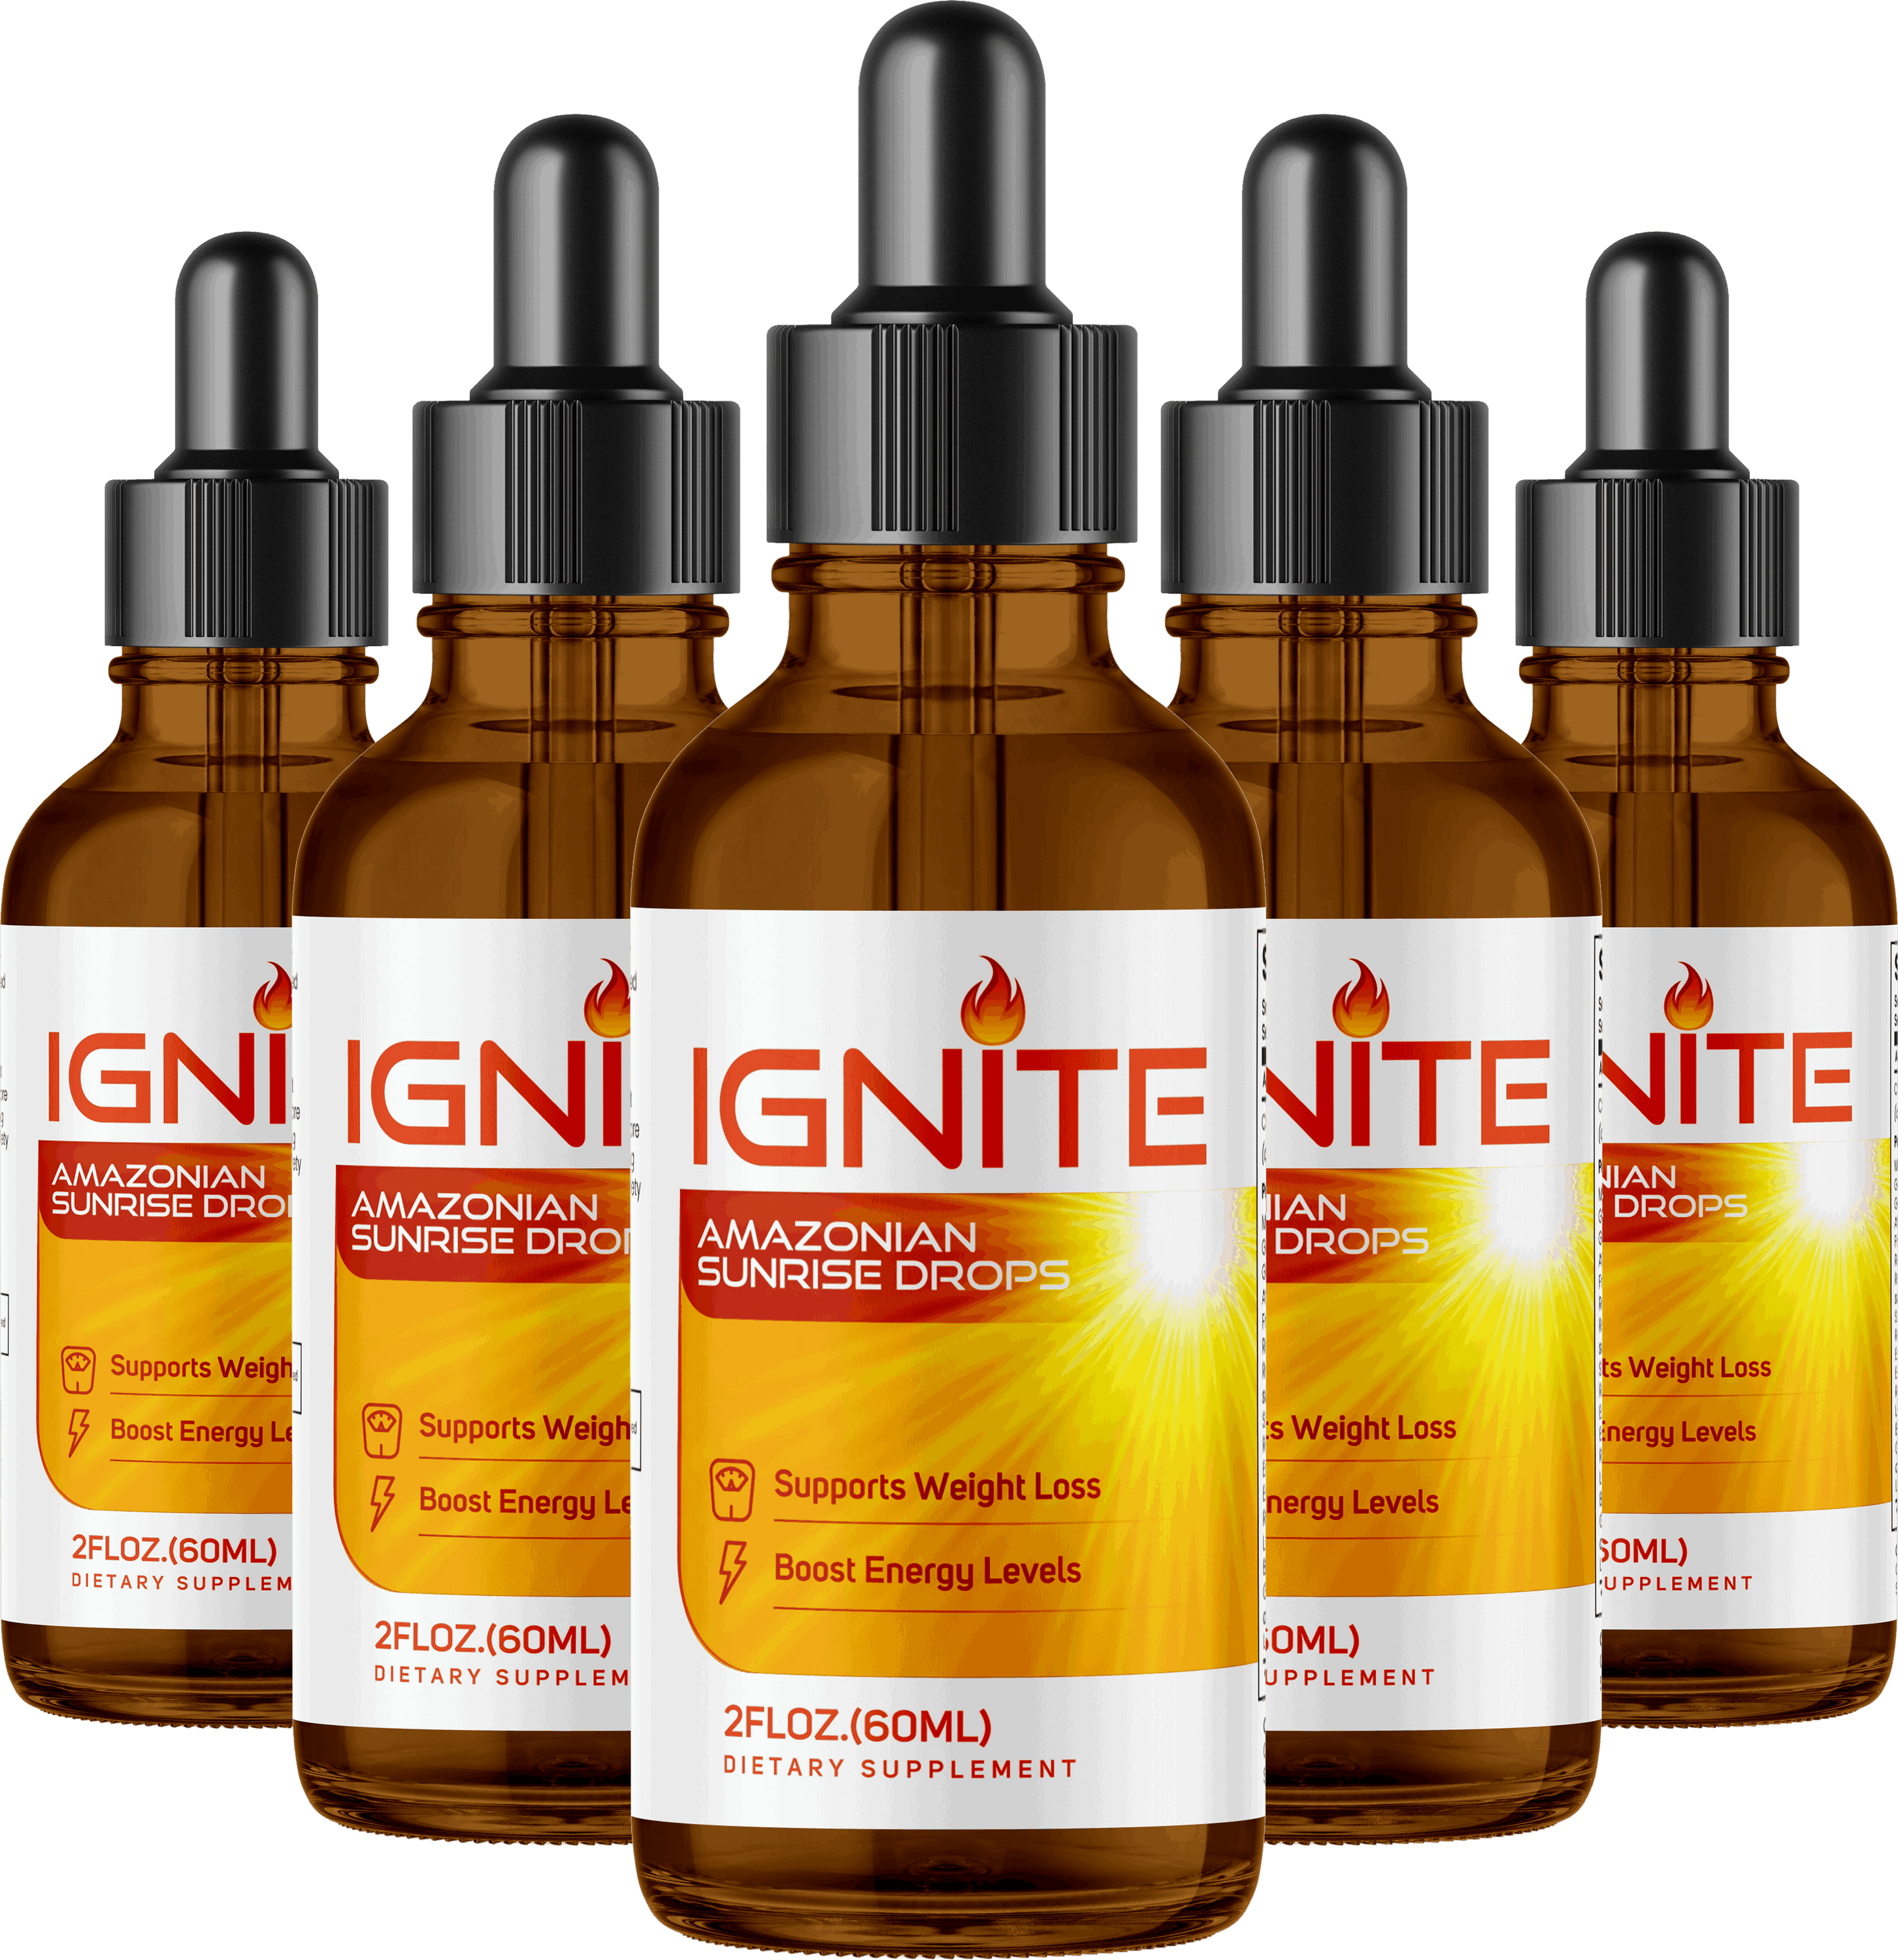 Ignite (Official) Amazonian Sunrise Drops | Only $69 Per Bottle